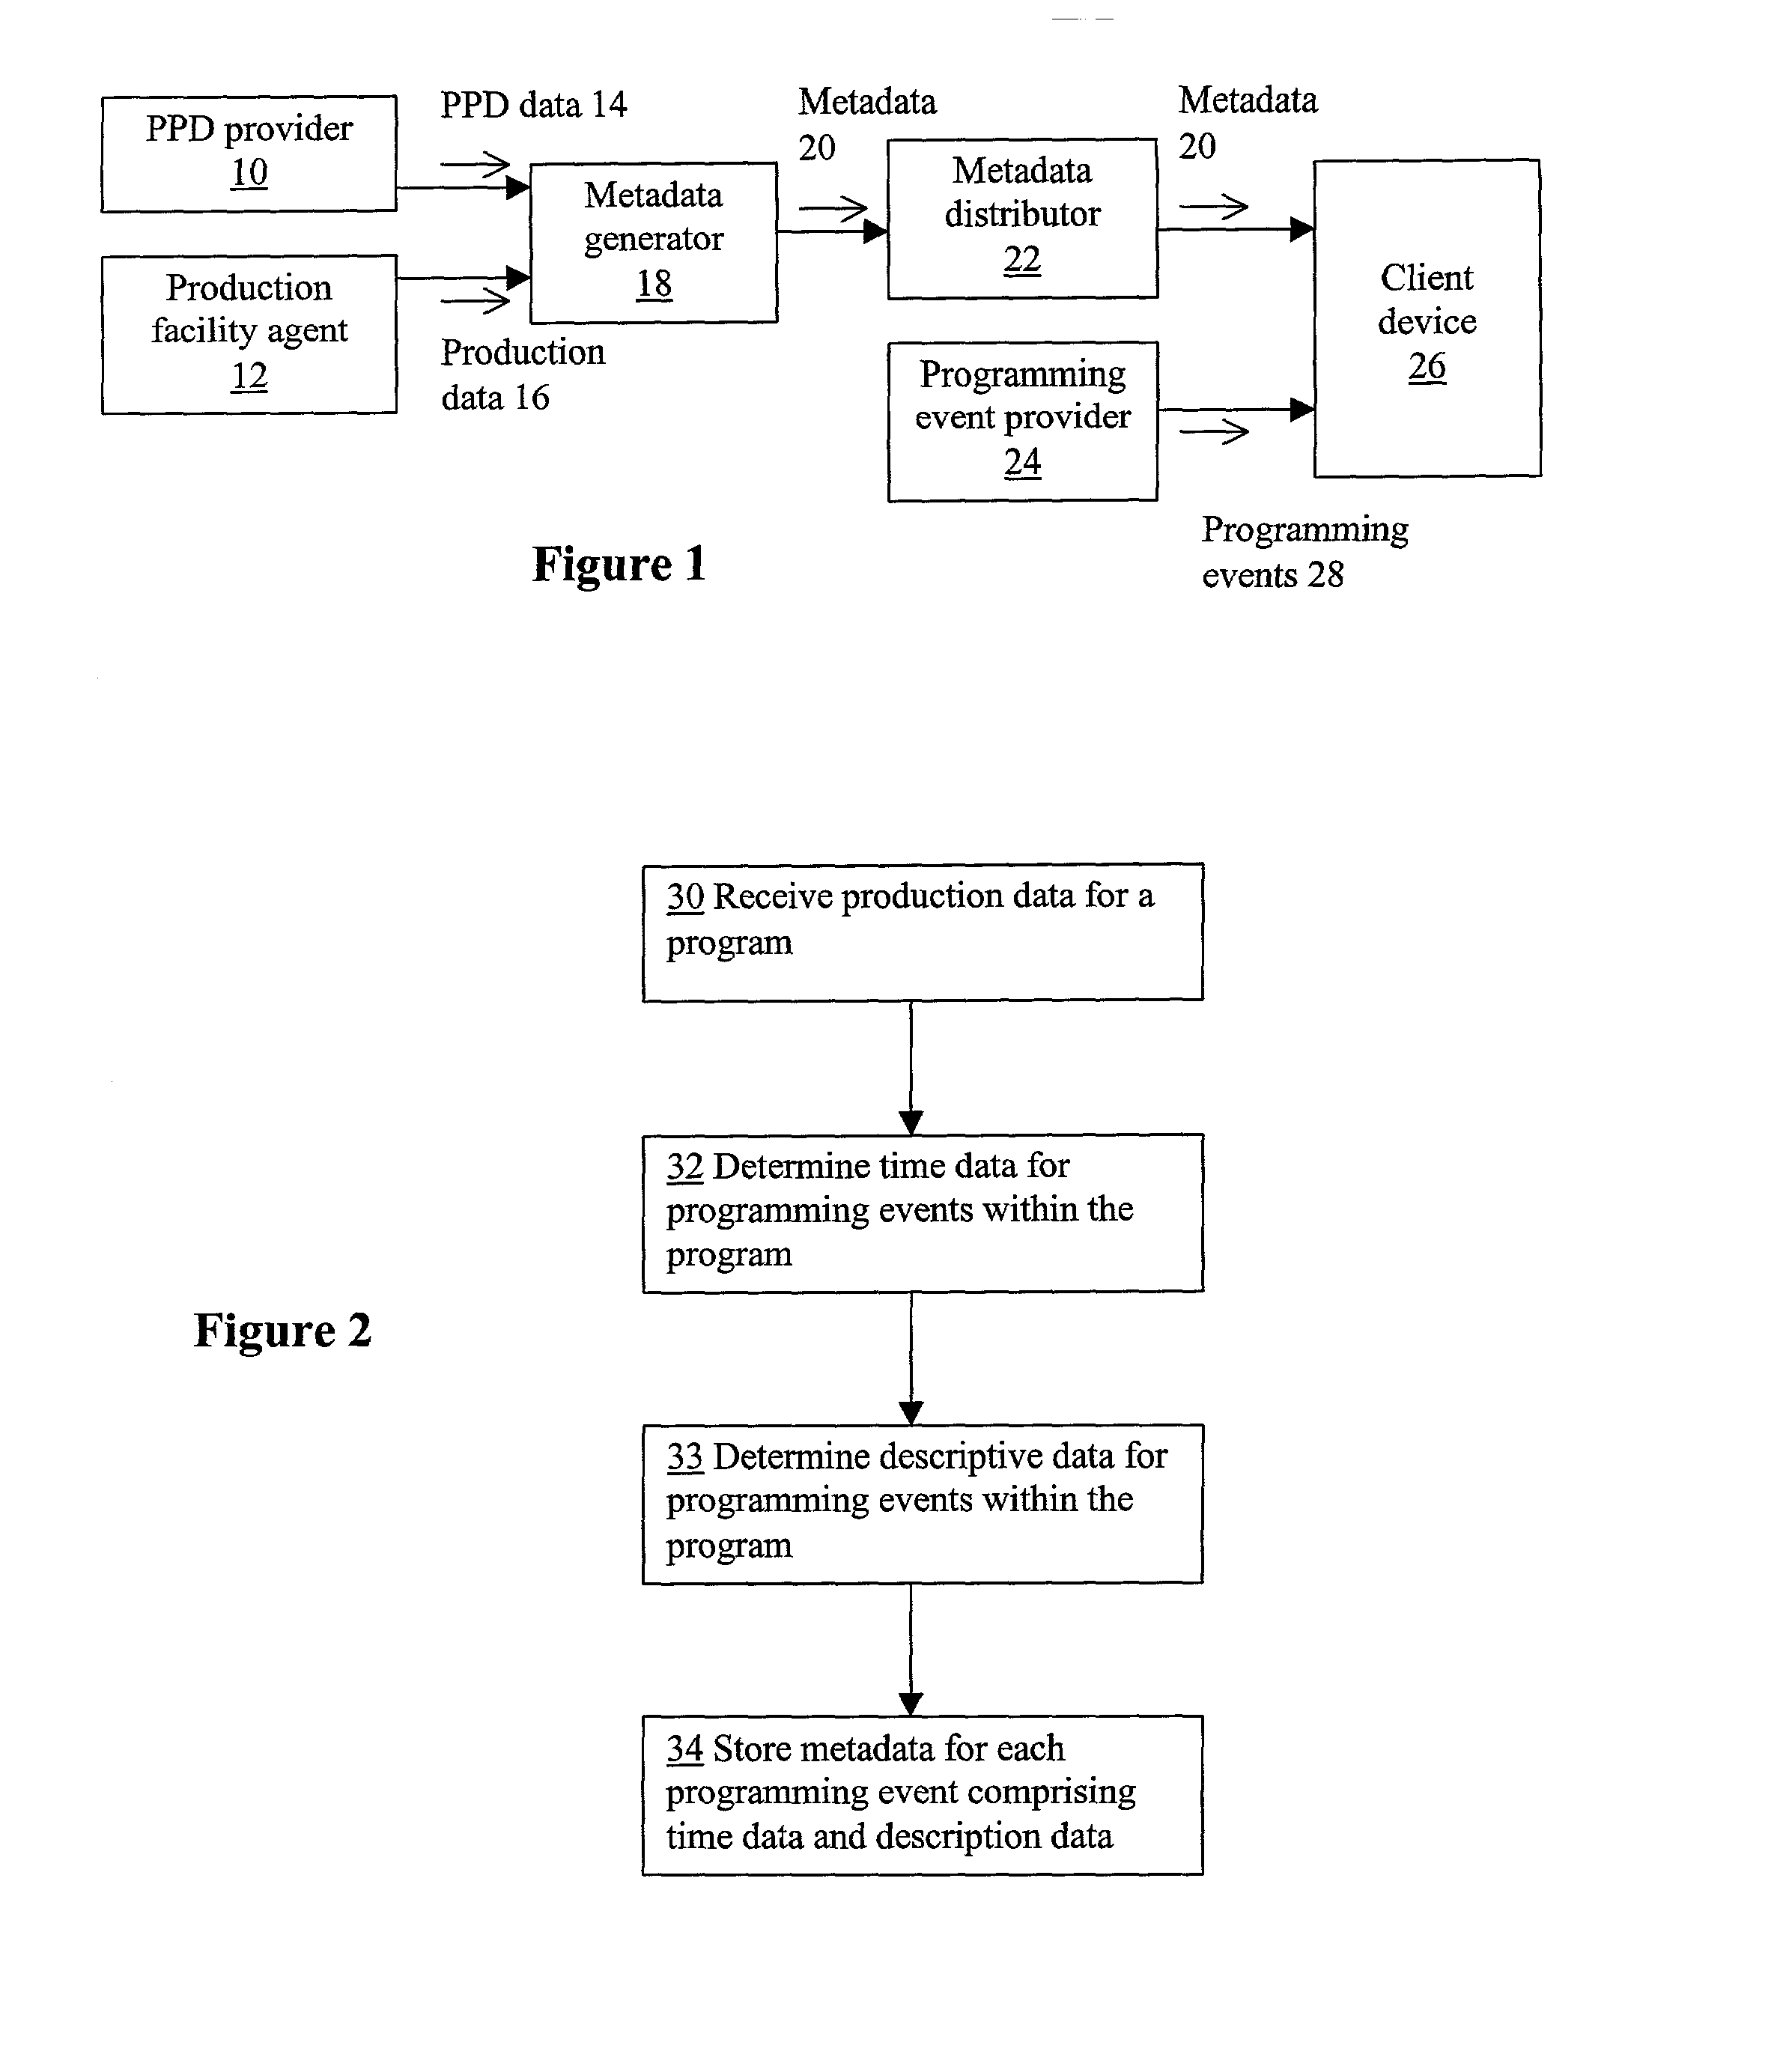 System and method for generating metadata for programming events